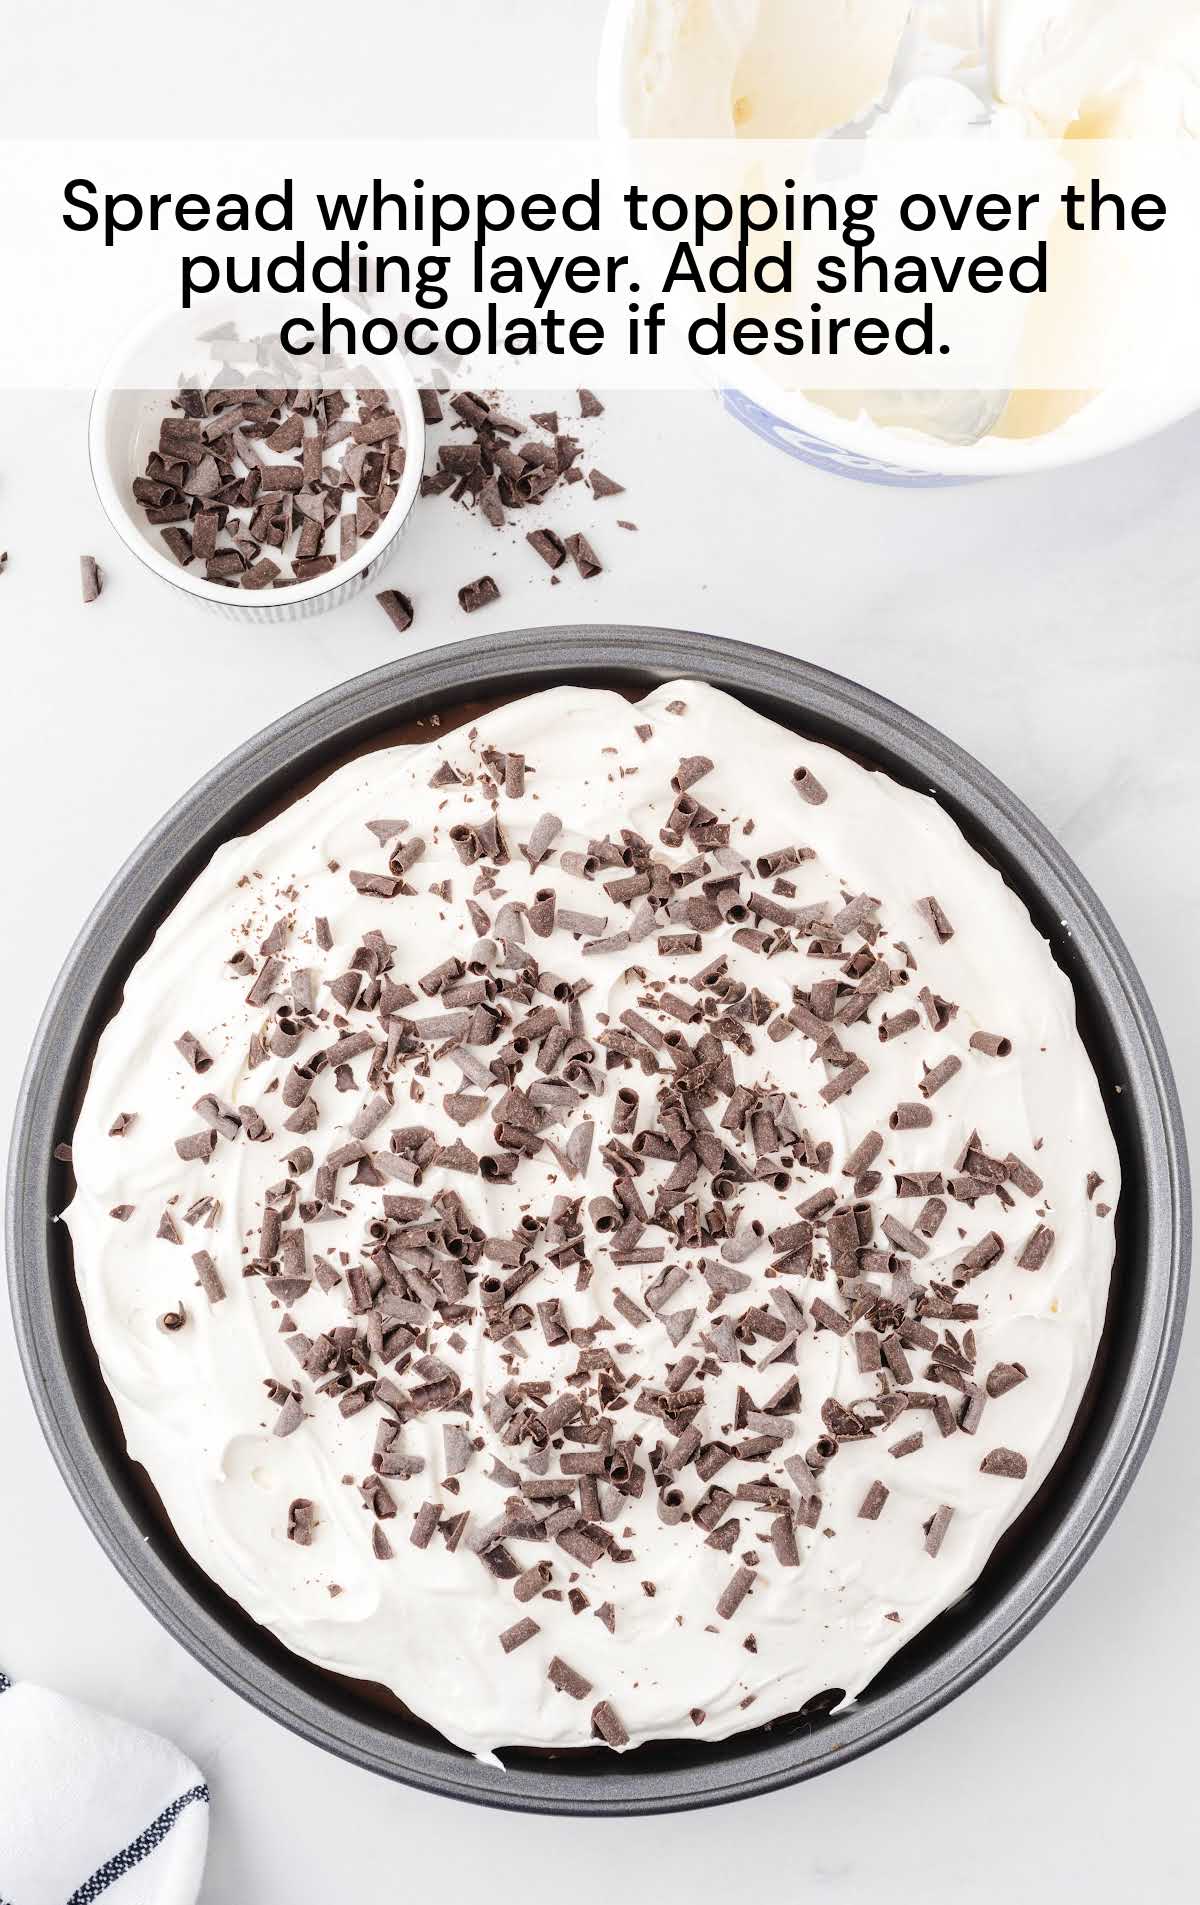 whipped topping spread over the pudding layer and shaved chocolate if desired in a baking dish